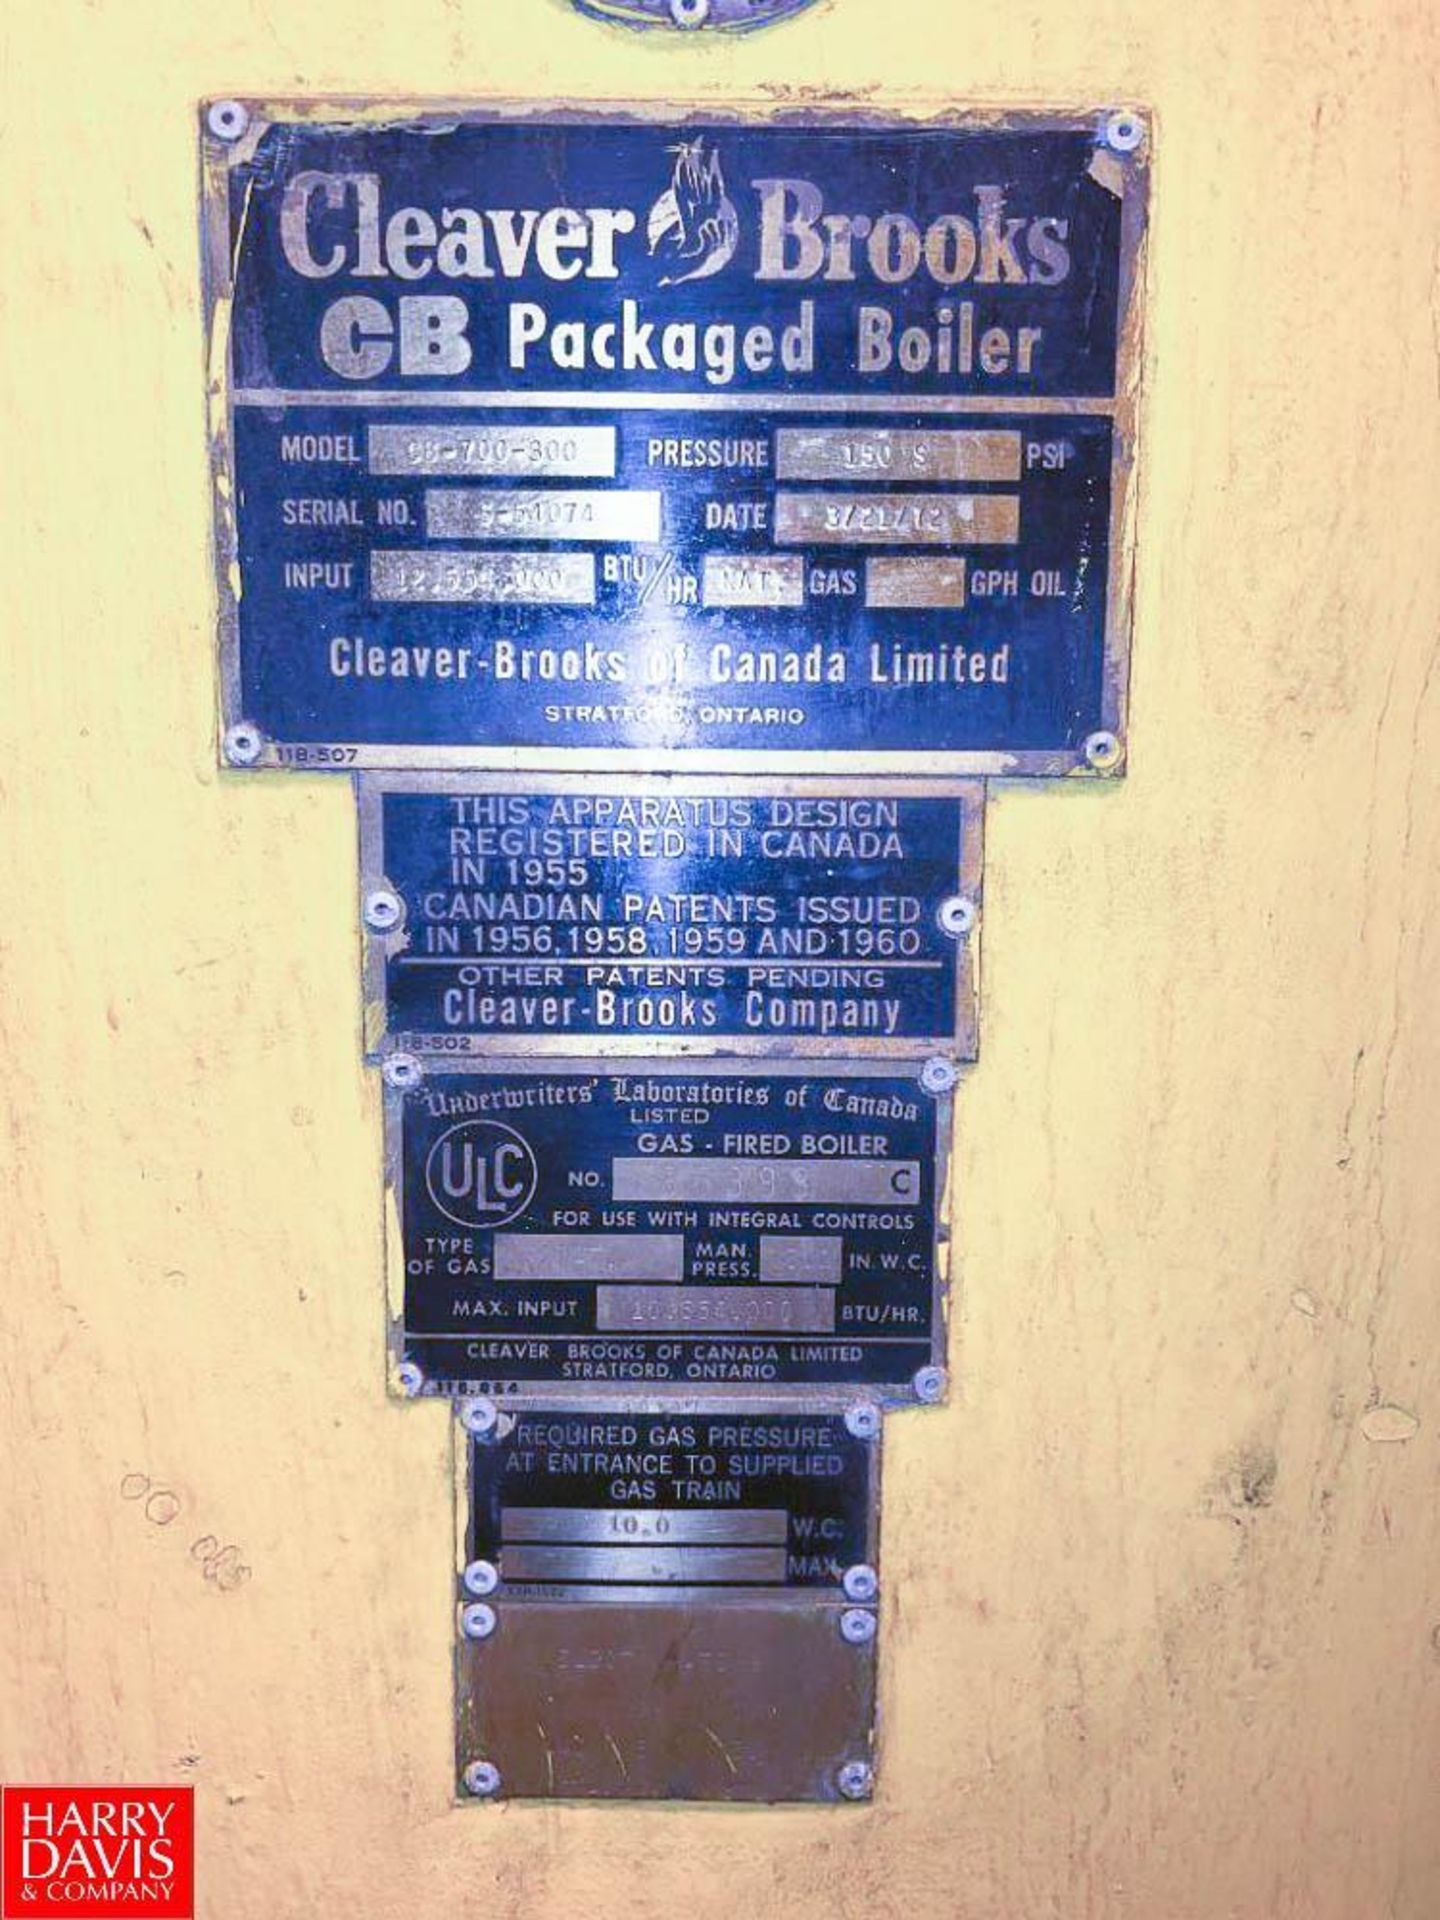 Cleaver Brooks Natural Gas 375 HP 1,50S PSI Packaged Boiler, Model: CB-700-300, S/N: S-54074 - Image 3 of 4